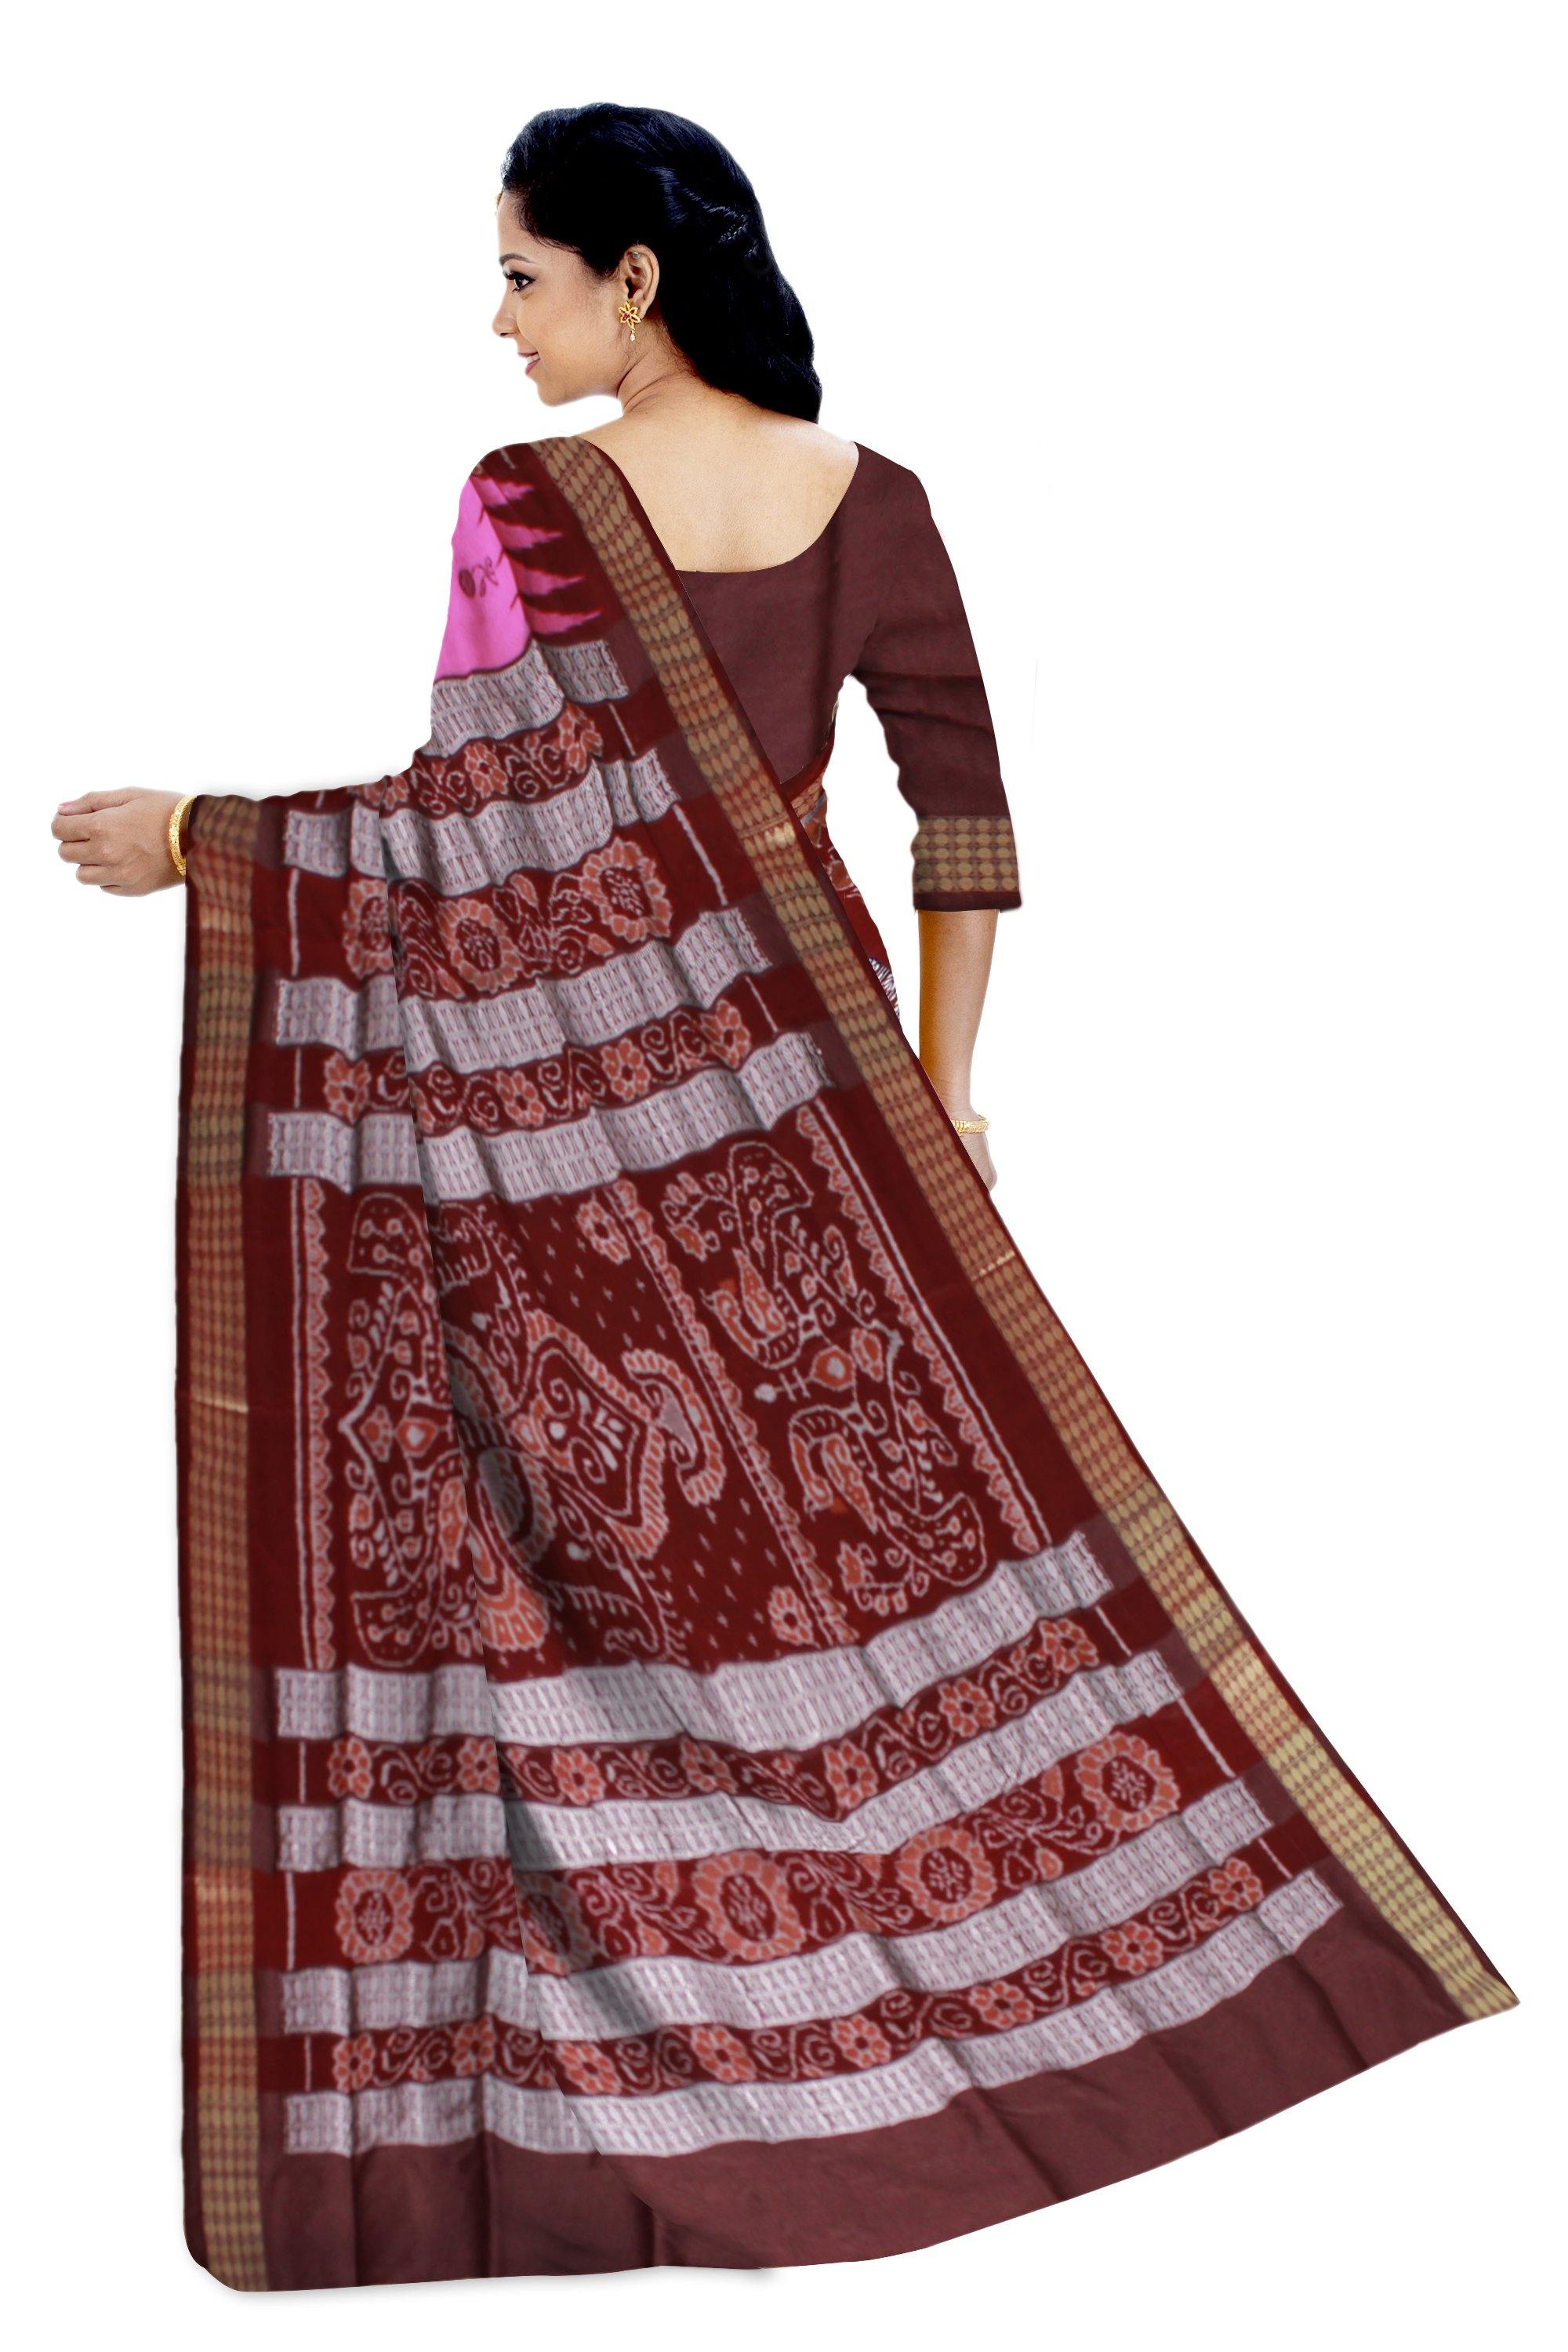 Latest design Pata saree in Pink and Brown color & Flower Bomkei with blouse Piece - Koshali Arts & Crafts Enterprise